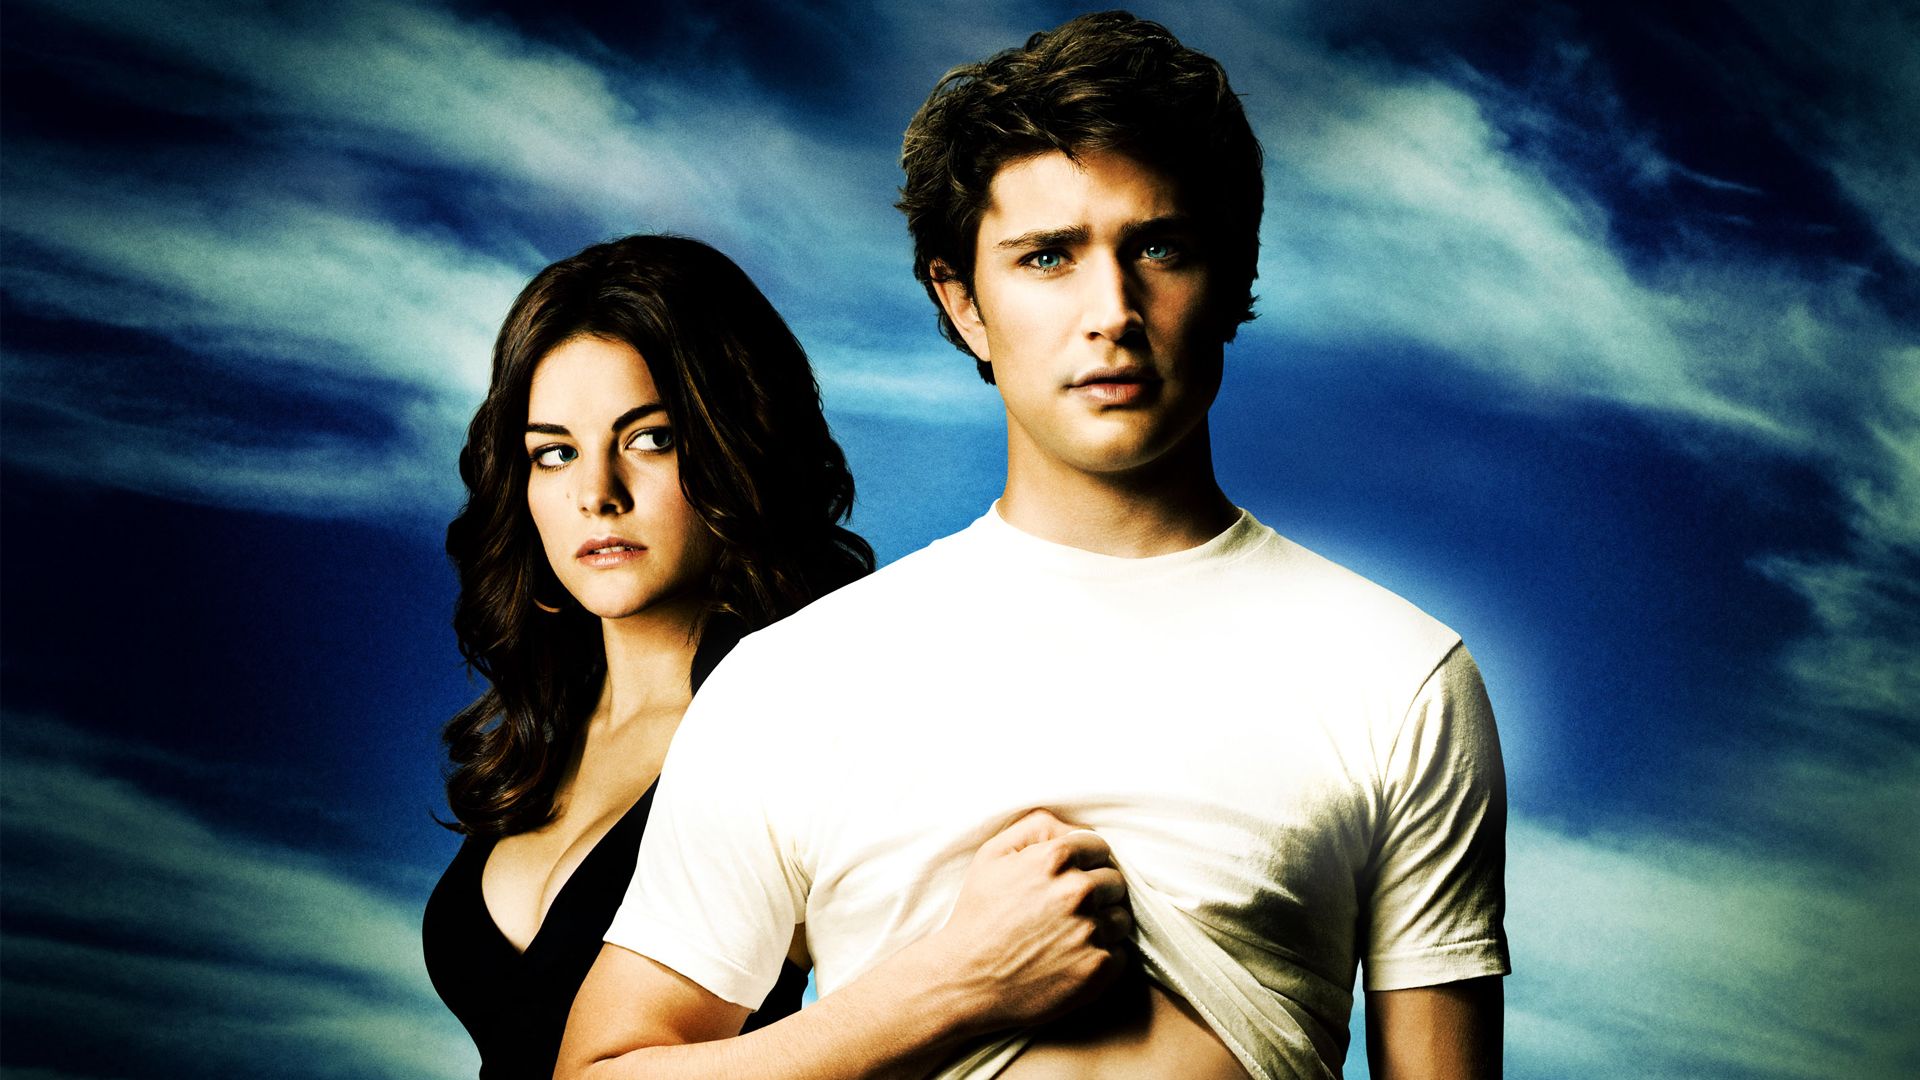 Kyle XY: The Matt Dallas Drama Premiered 10 years Ago on ABC Family + renewed TV shows Series Finale